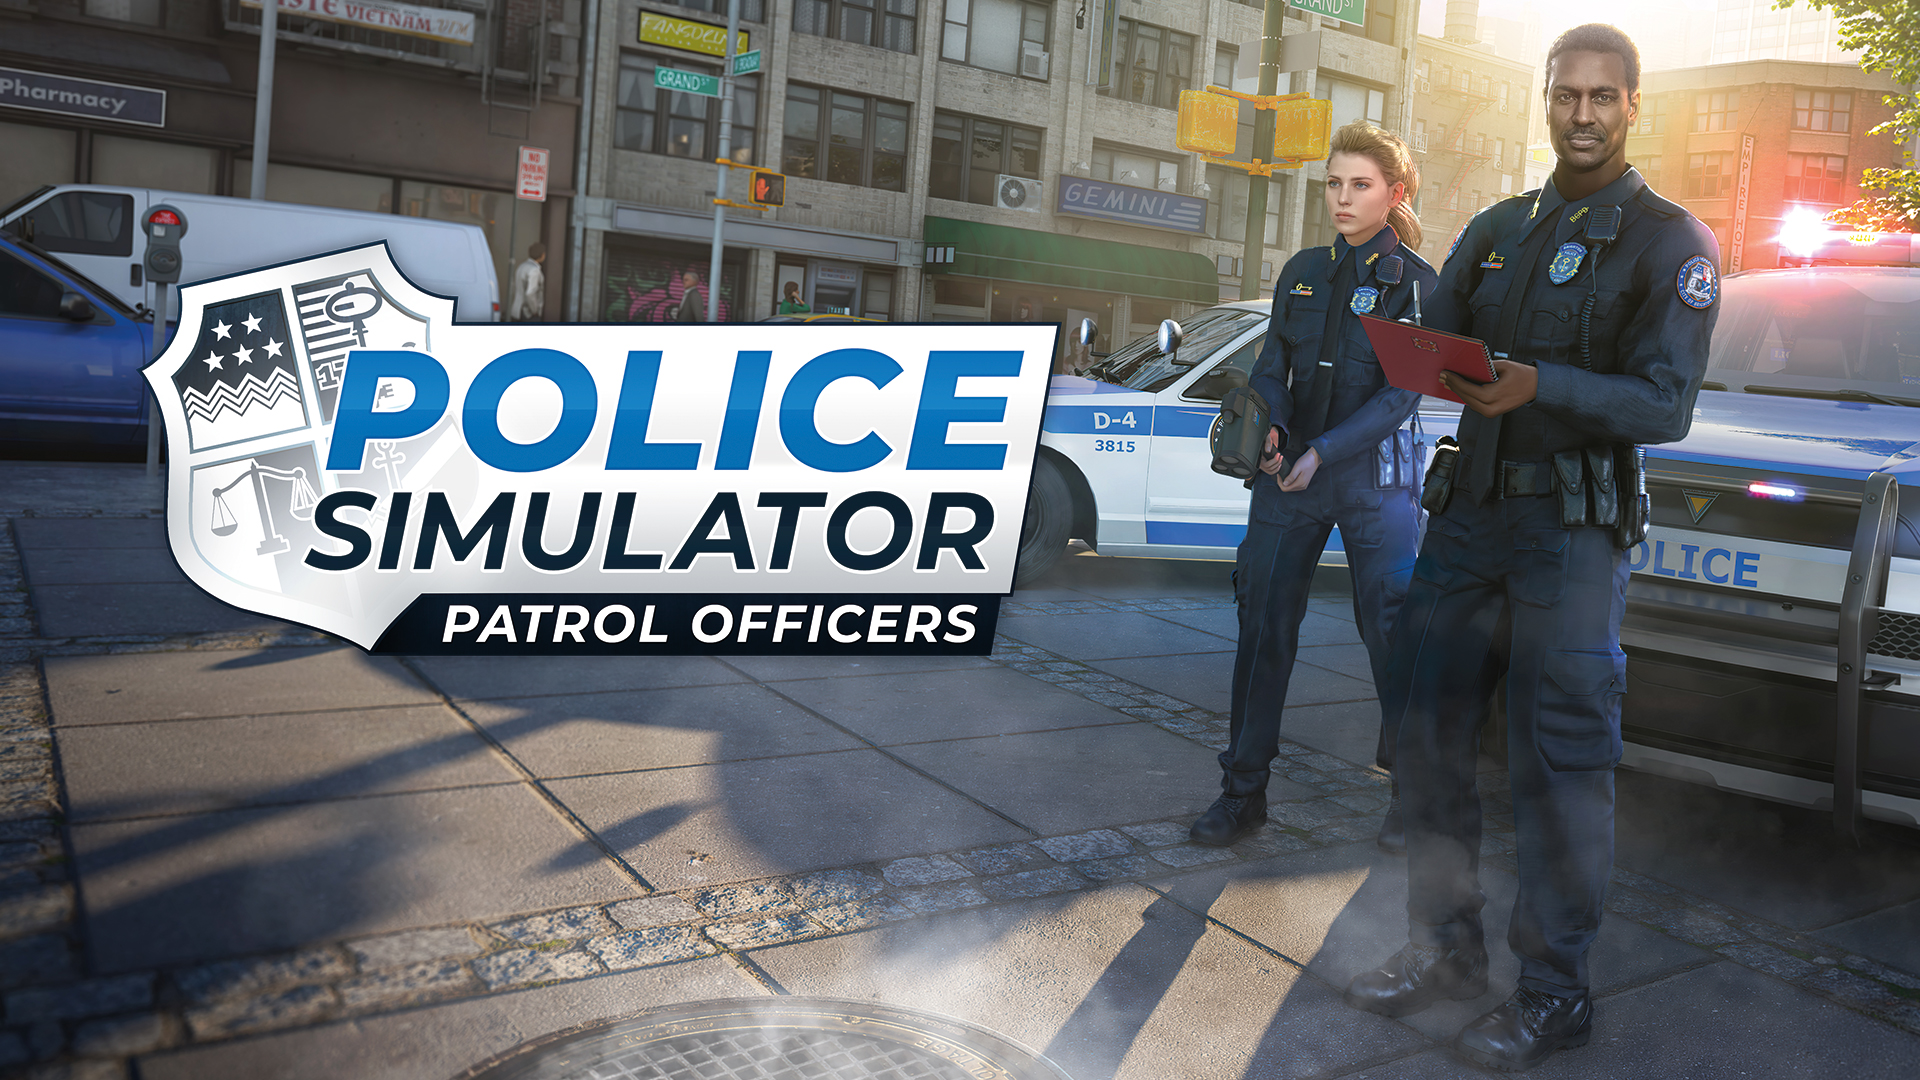 Police Simulator: Patrol Officers updates gets new